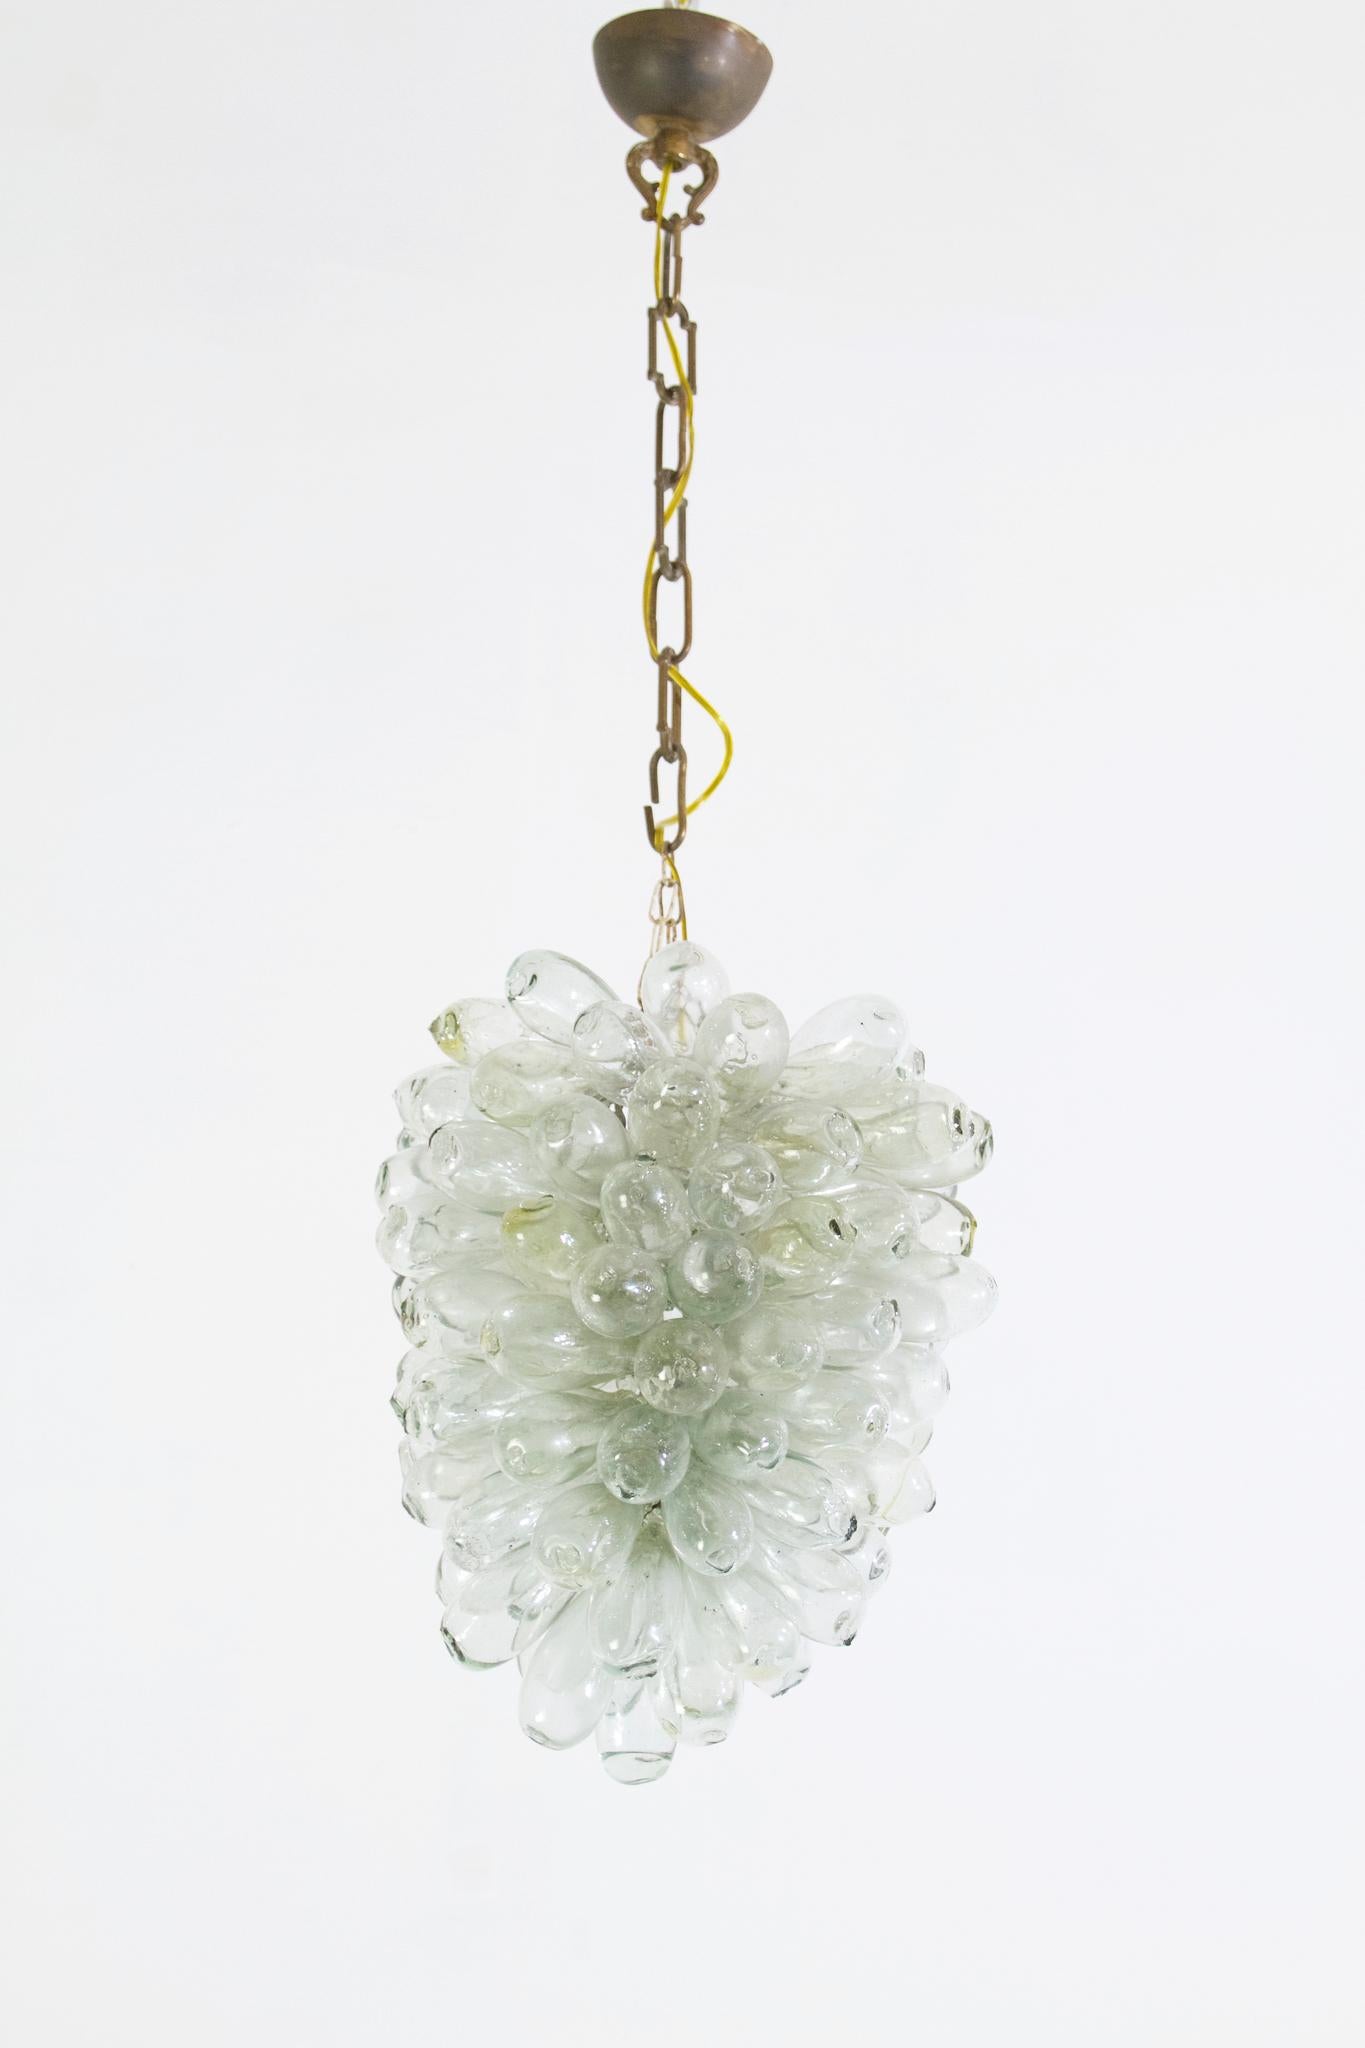 This ceiling lamp is completely handmade by making small bubbles out of recycled glass which are assembled into a grape like shape. No cracks or breakages.